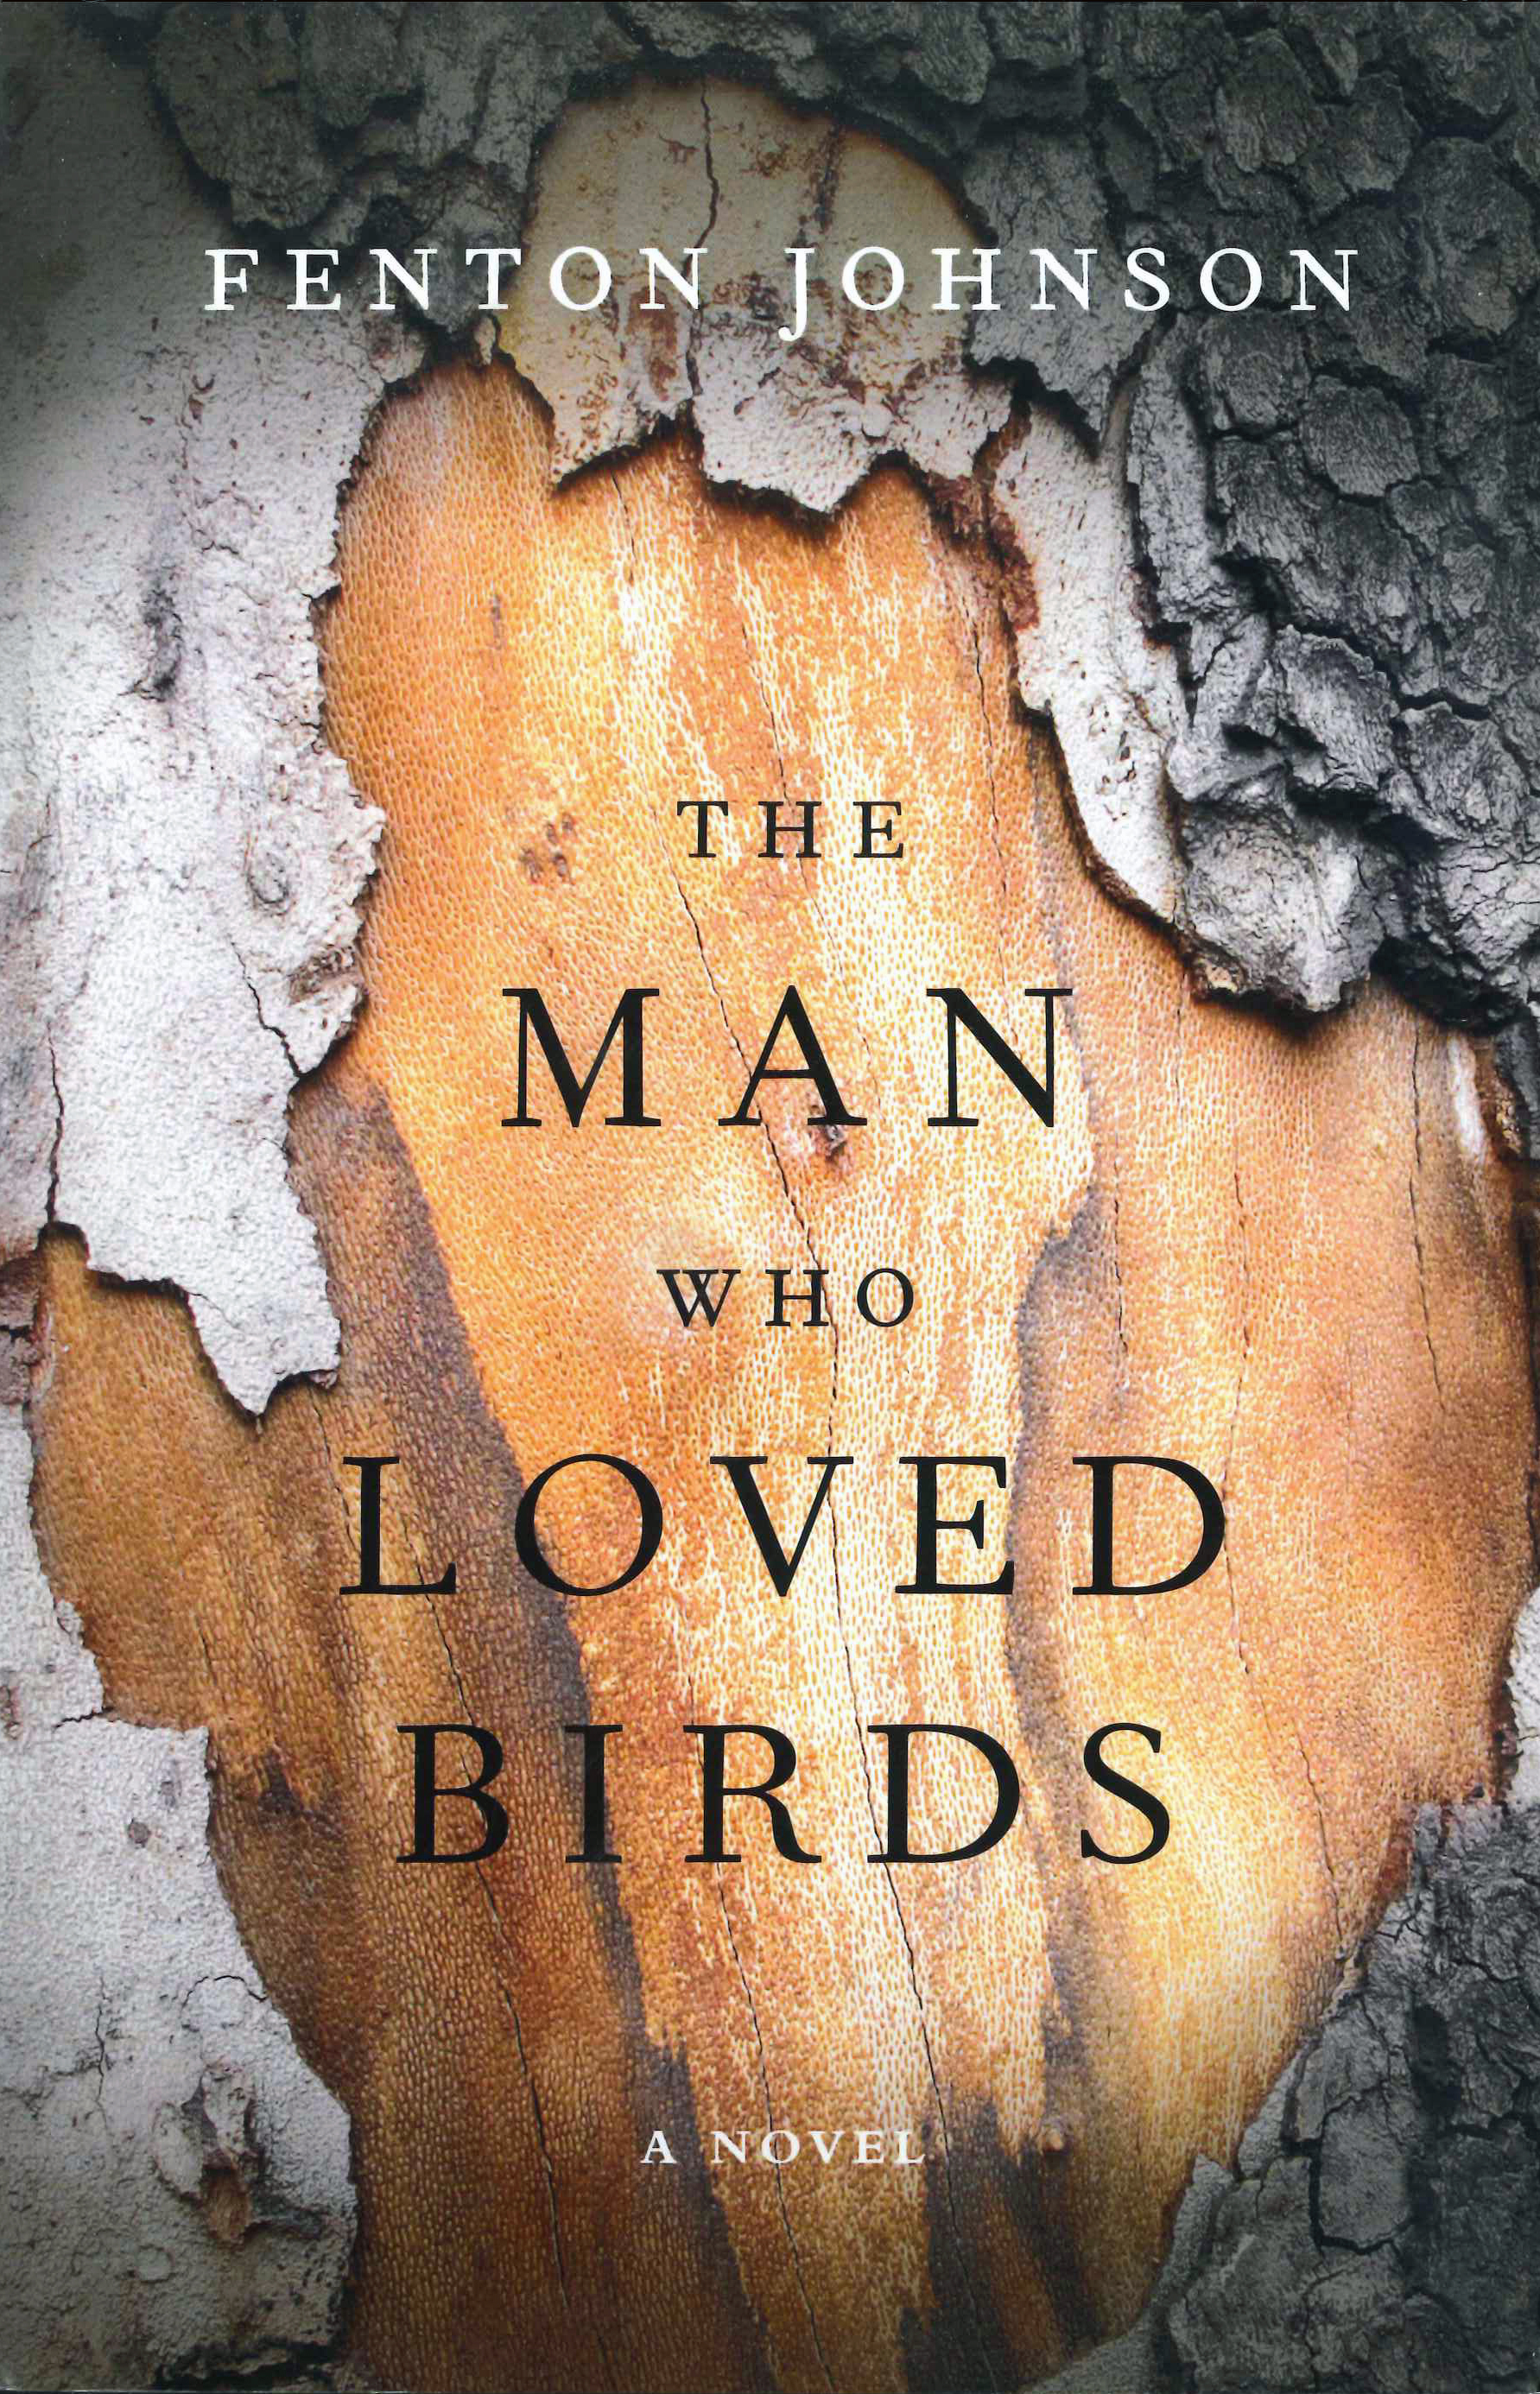 The Man Who Loved Birds by Fenton Johnson